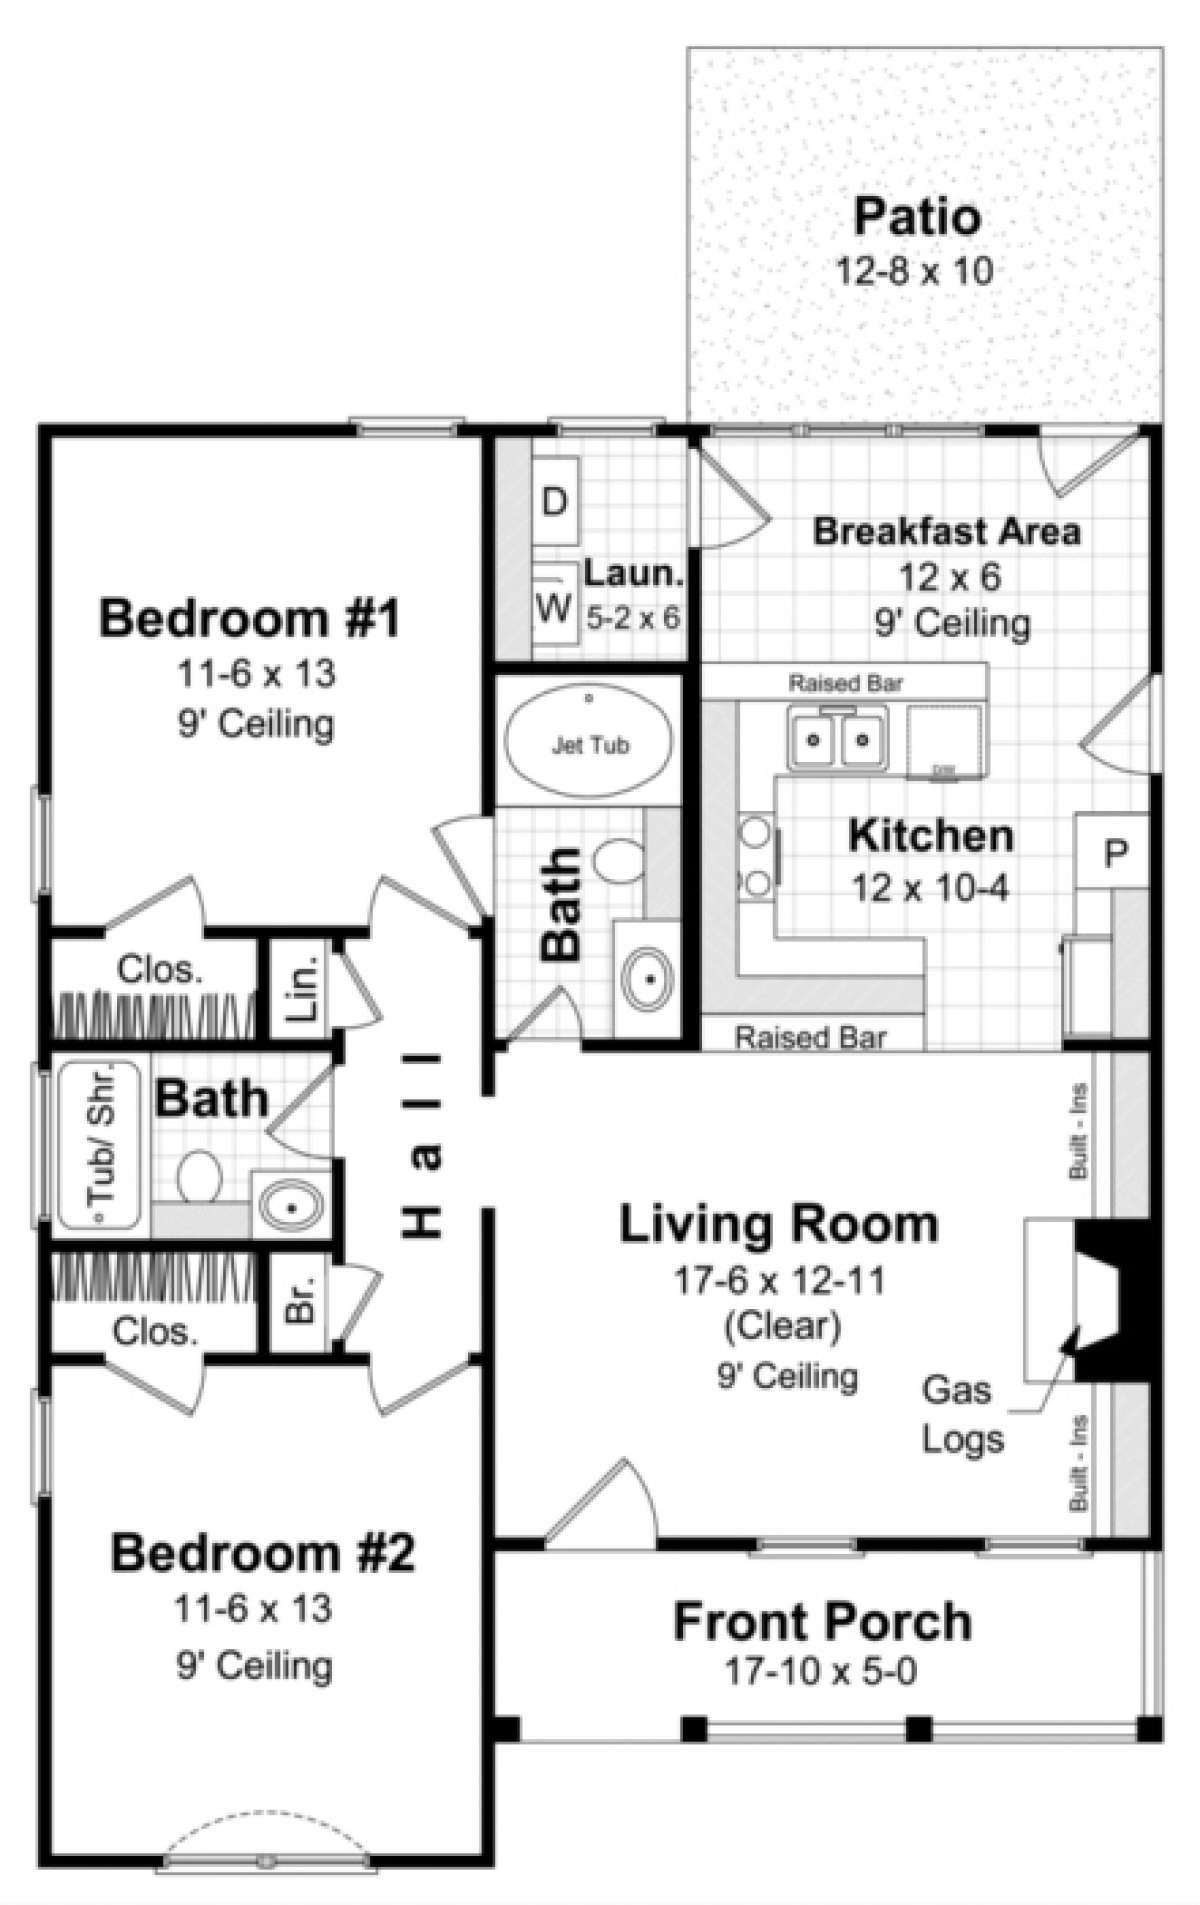 Featured image of post 800 Sq Ft House Plans 2 Bedroom 2 Bath / The interior of the home features approximately 800 square feet of usable living space which provides an open floor plan, two bedrooms and one bath.